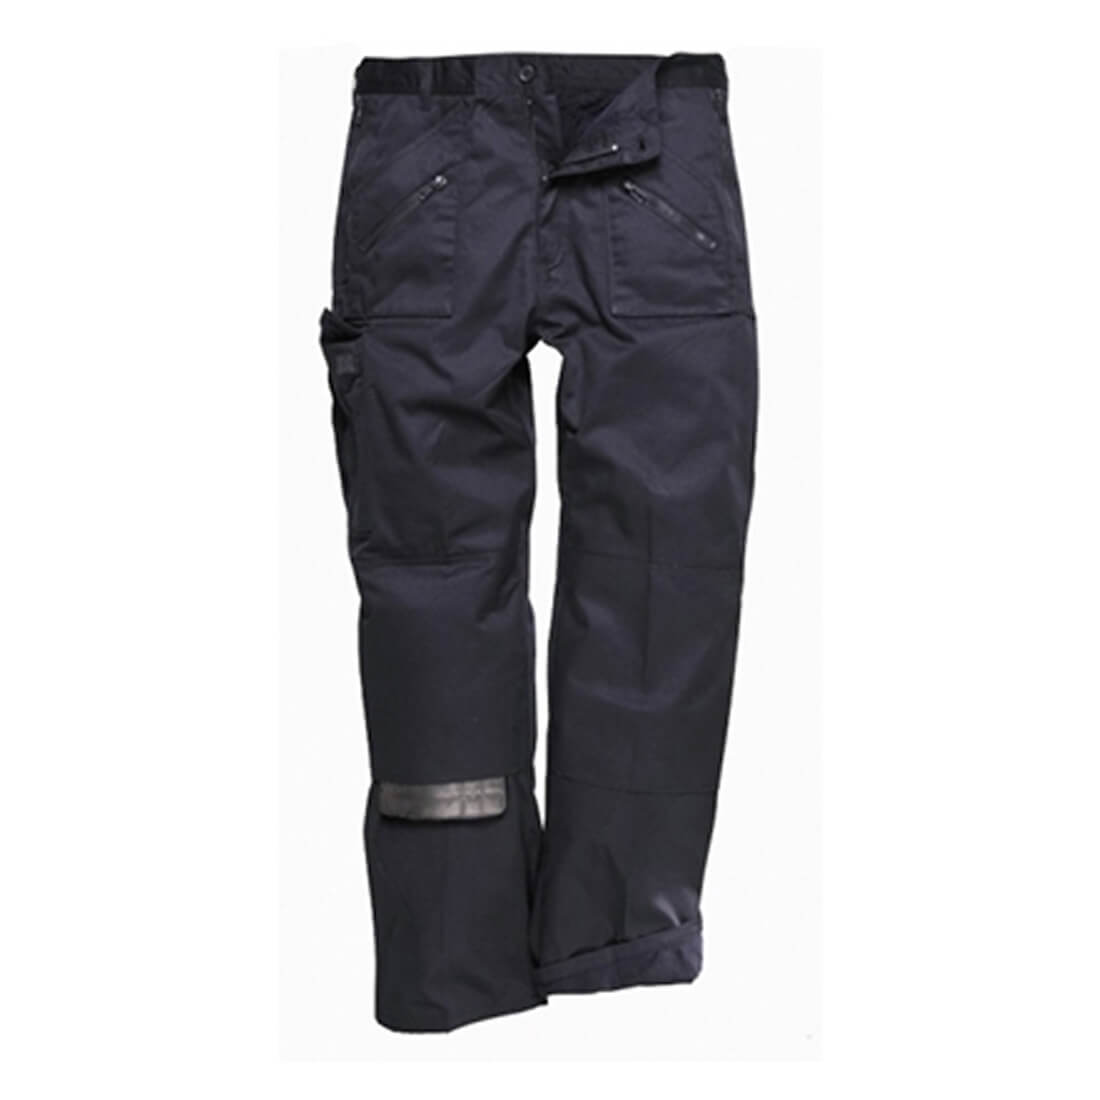 Lined Action Trousers - Safetywear